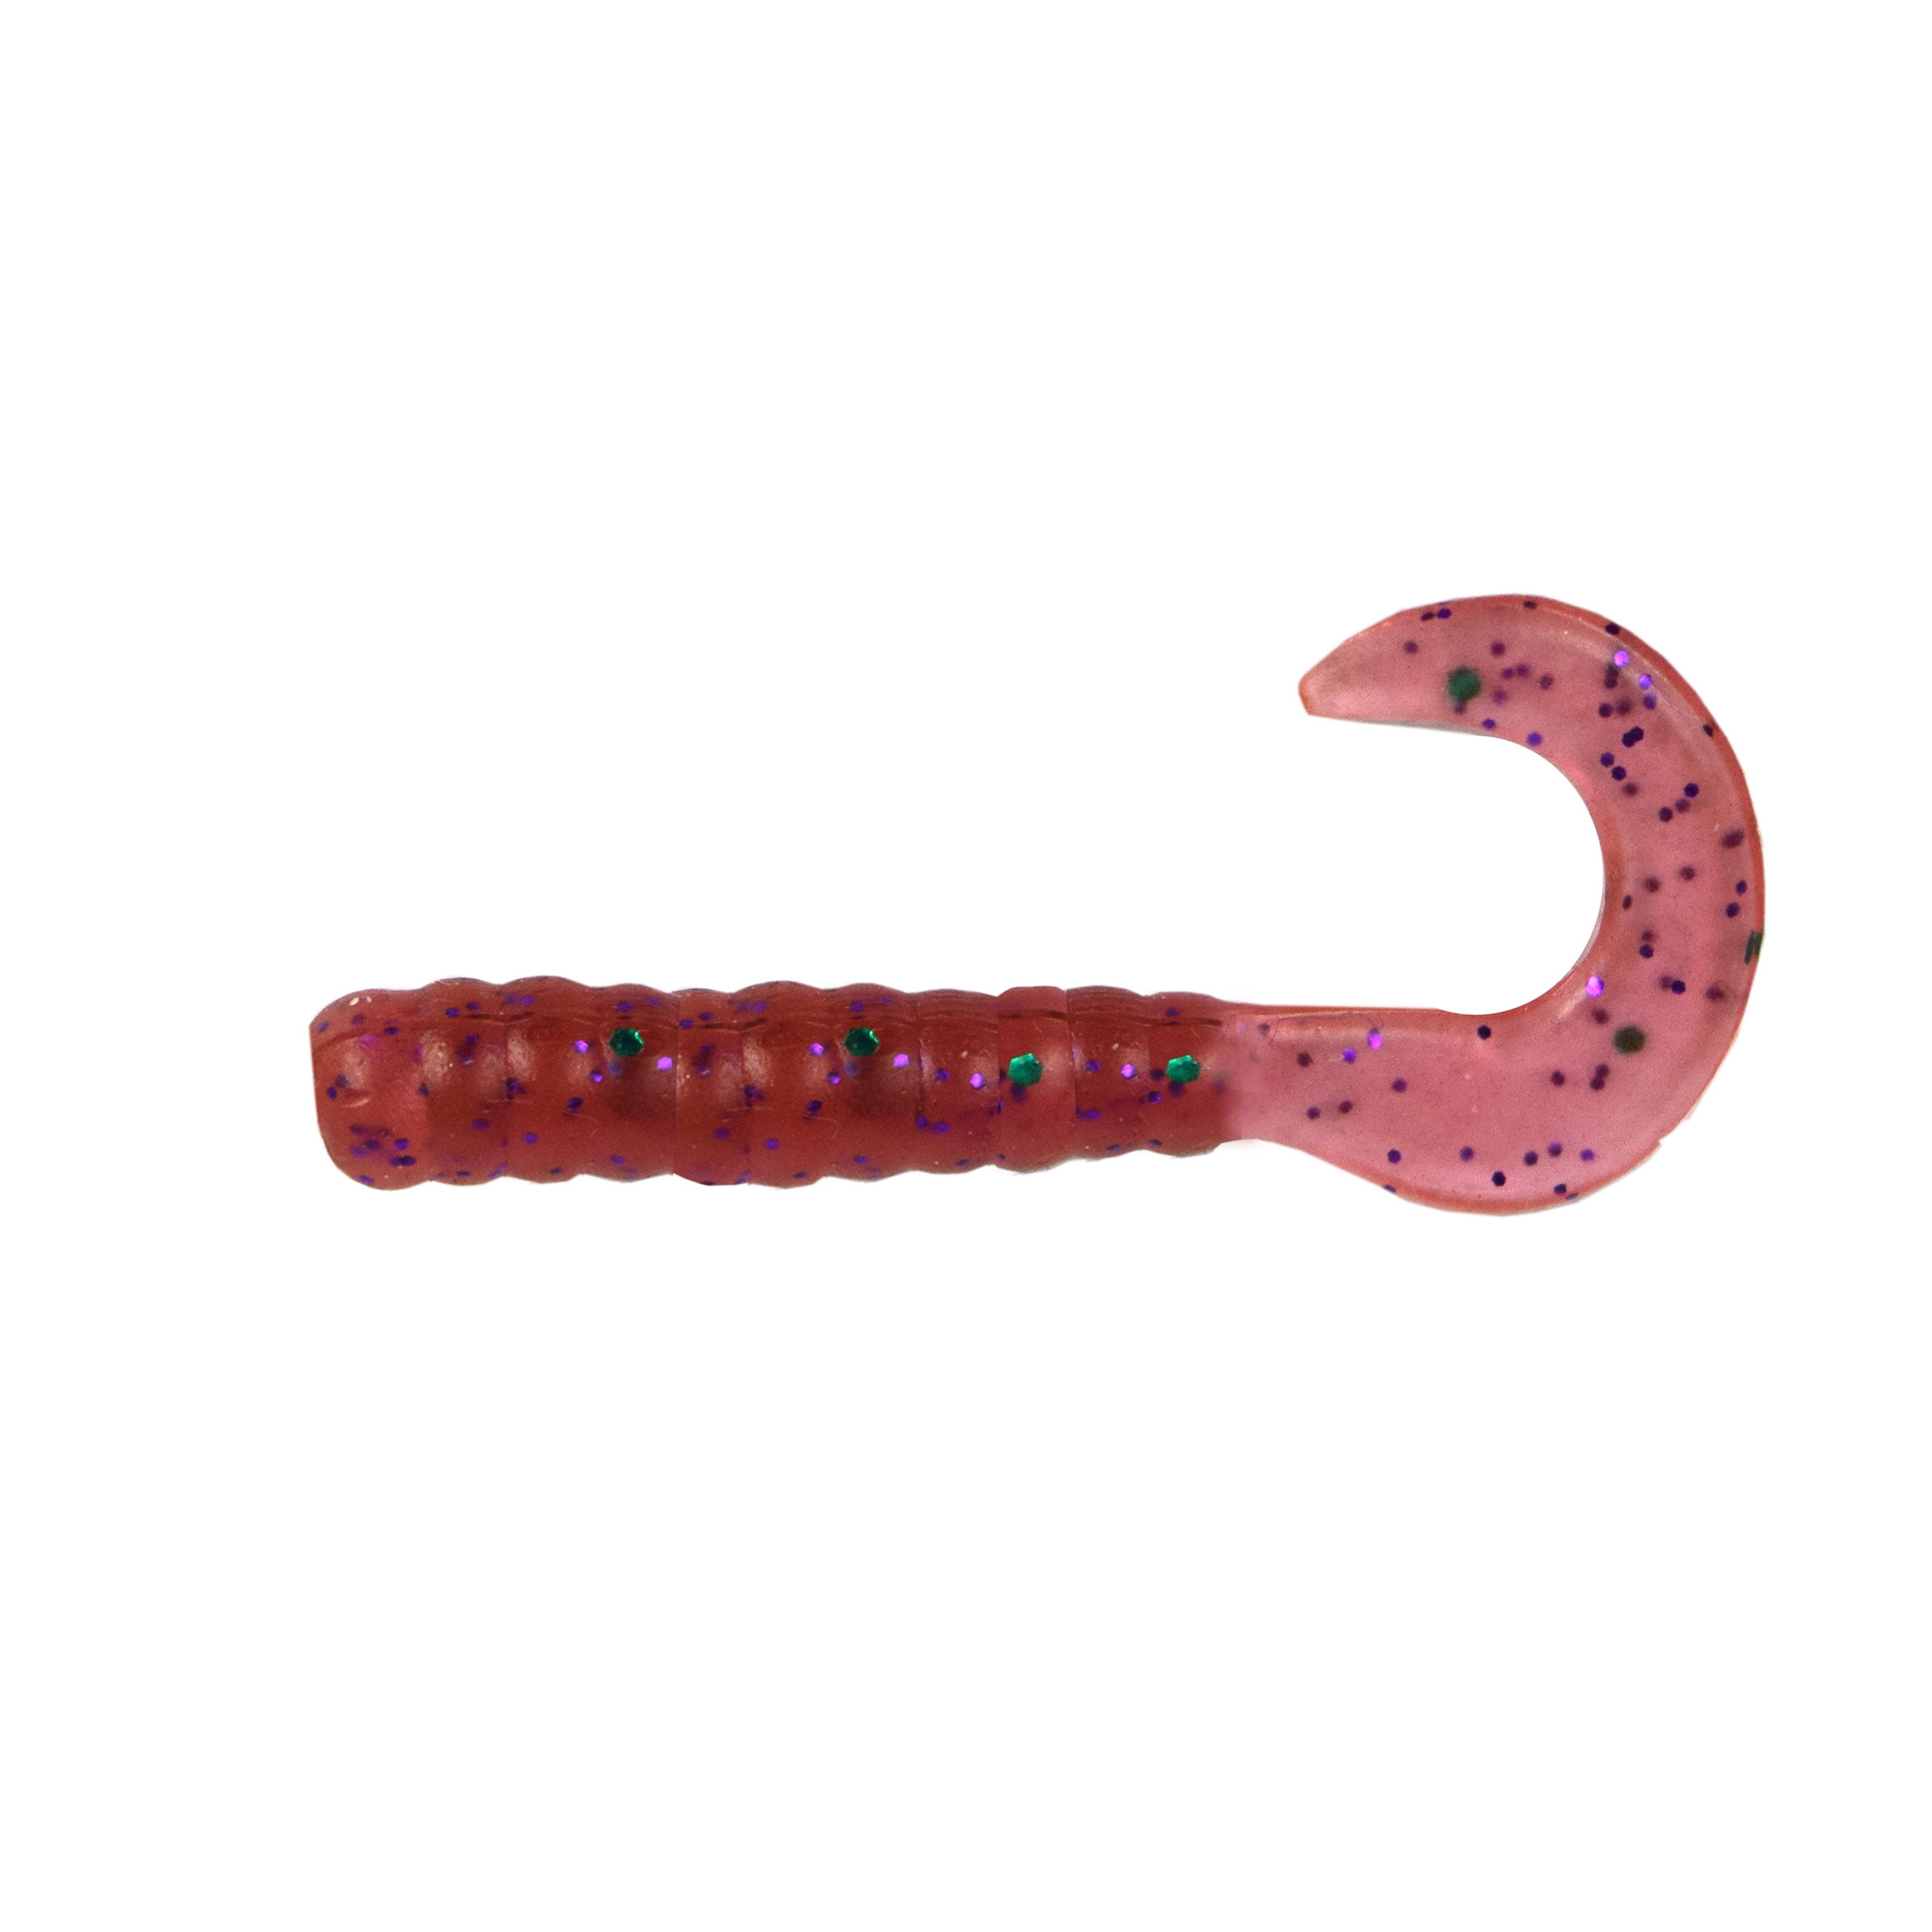 Tackle HD 70-Pack Grub Fishing Lures, 3-Inch Skirted Grub with Curly Tail,  Bulk Fishing Grubs for Crappie, Bass, Walleye, or Trout Bait, Freshwater or  Saltwater Swimbait, Junebug 